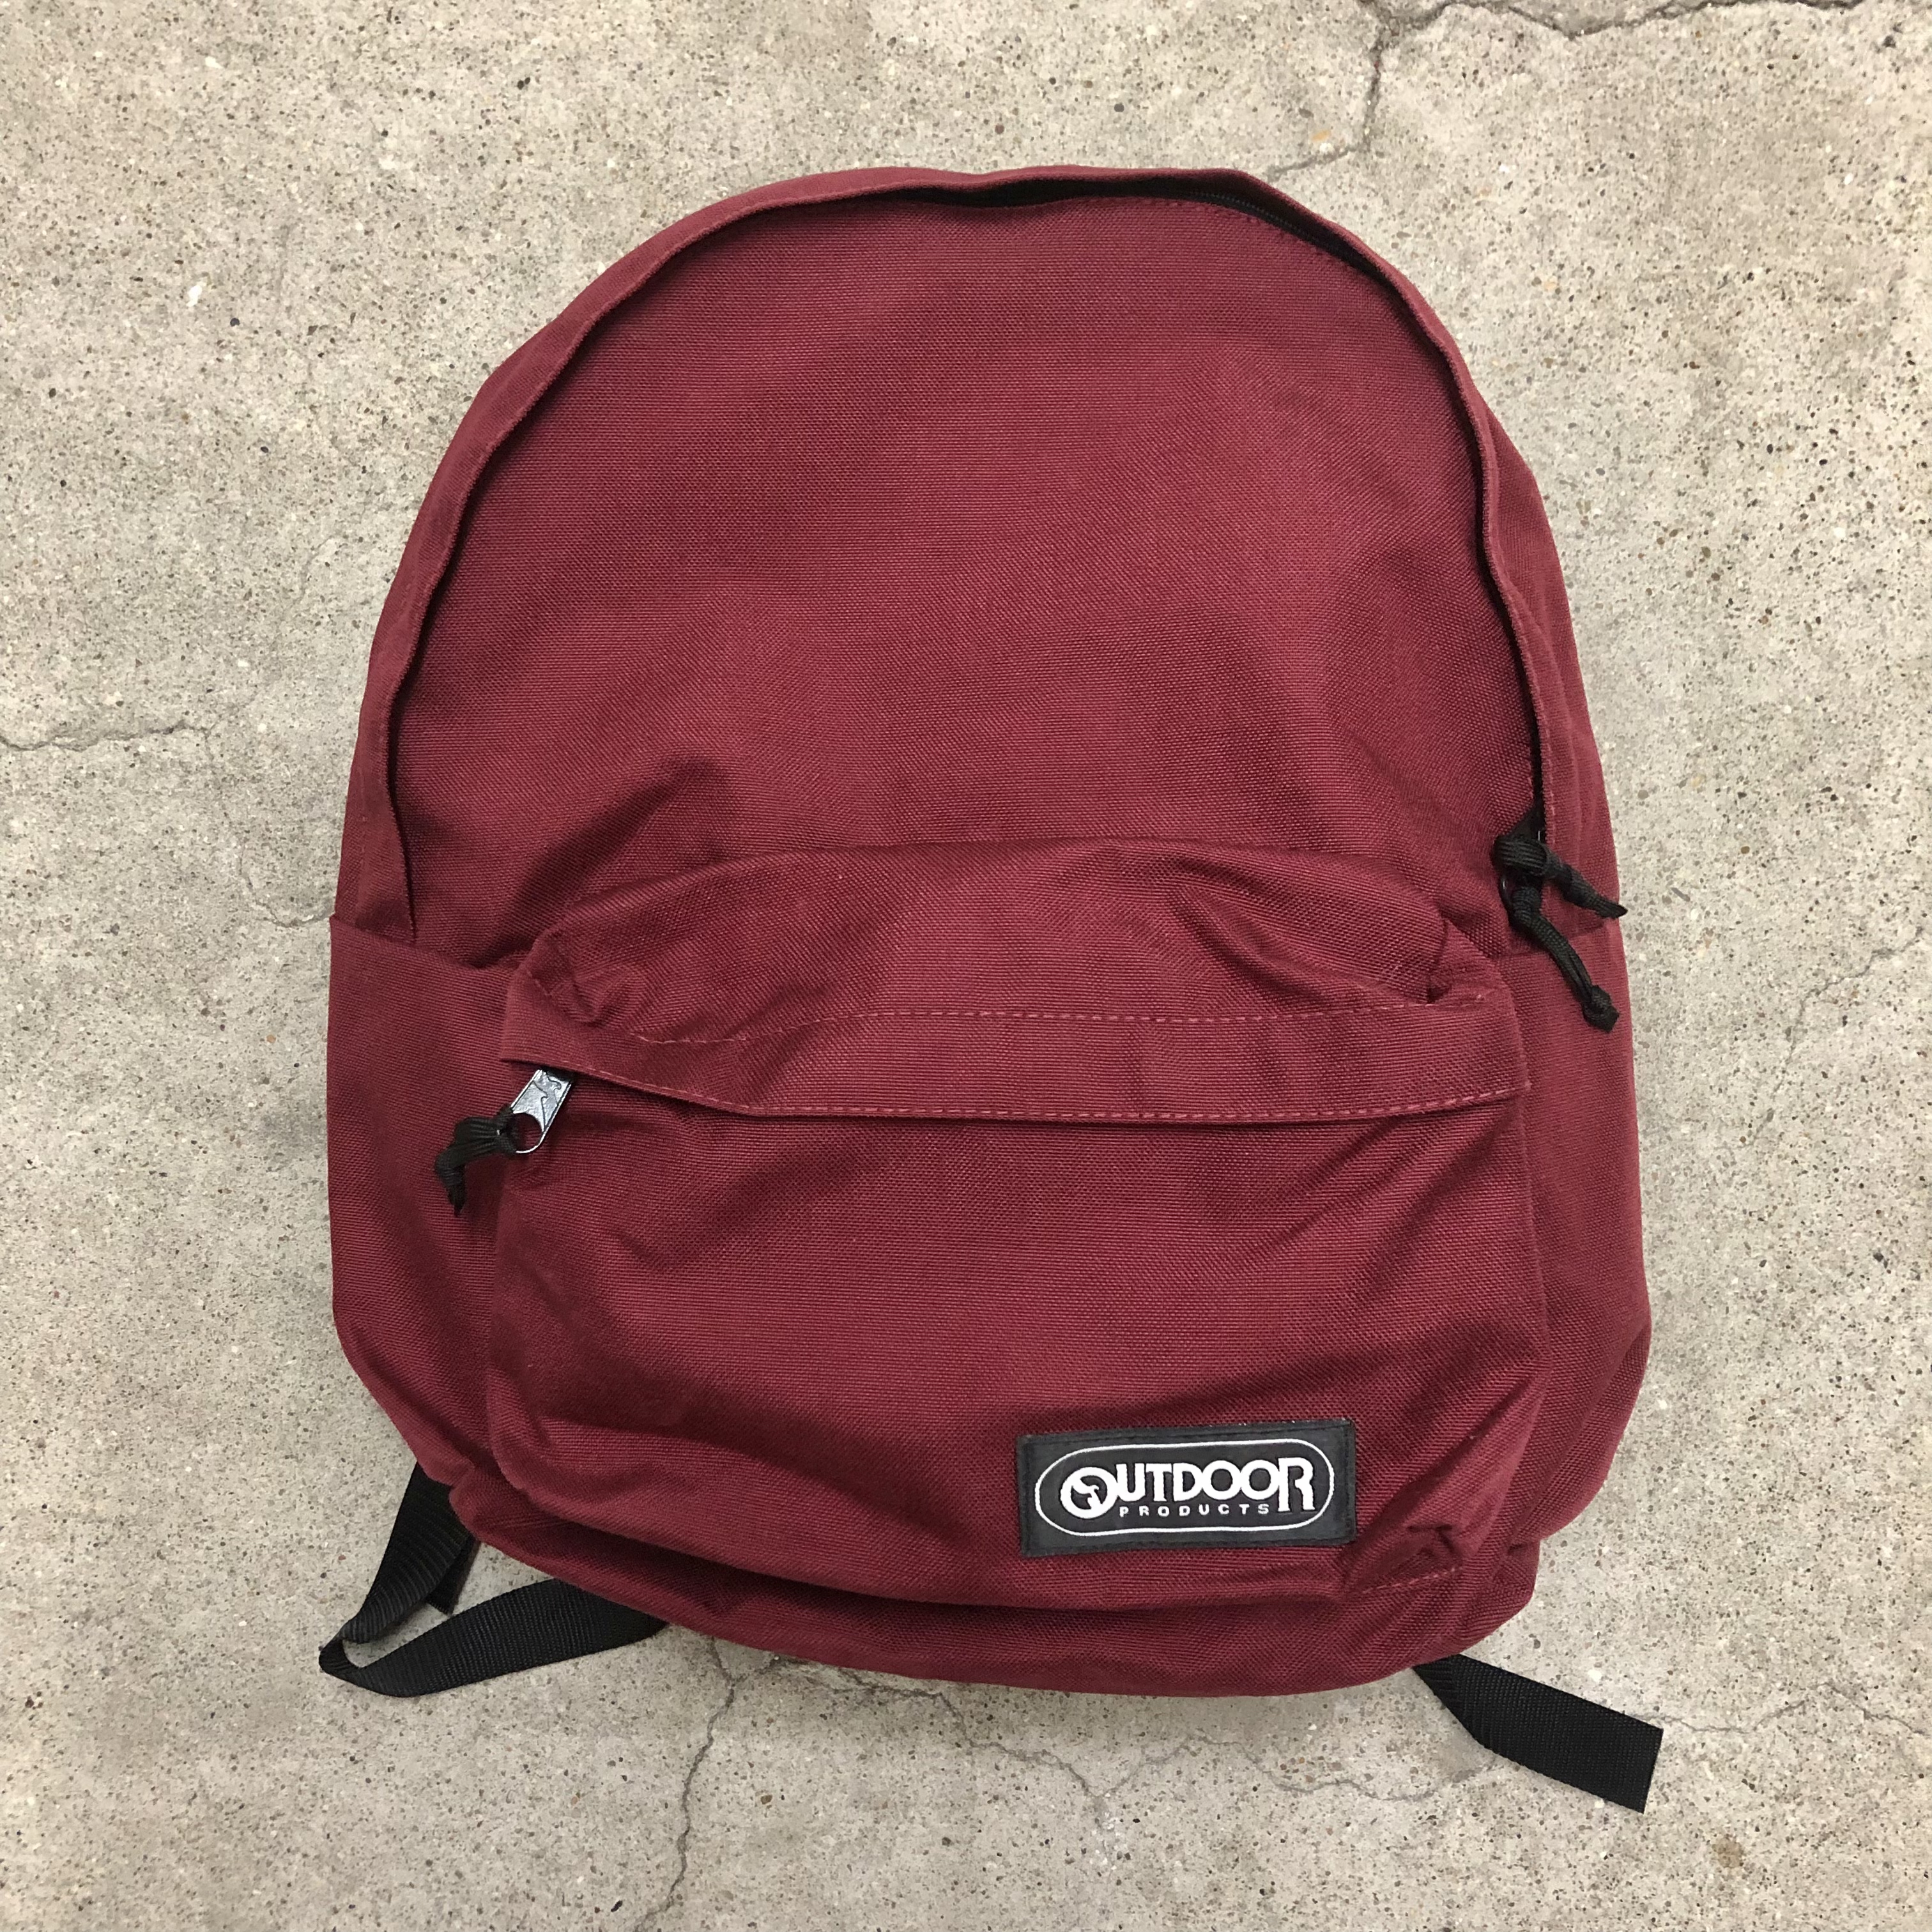 90s OUTDOOR PRODUCTS/Backpack/USA製/バックパック/リュック/ボルドー